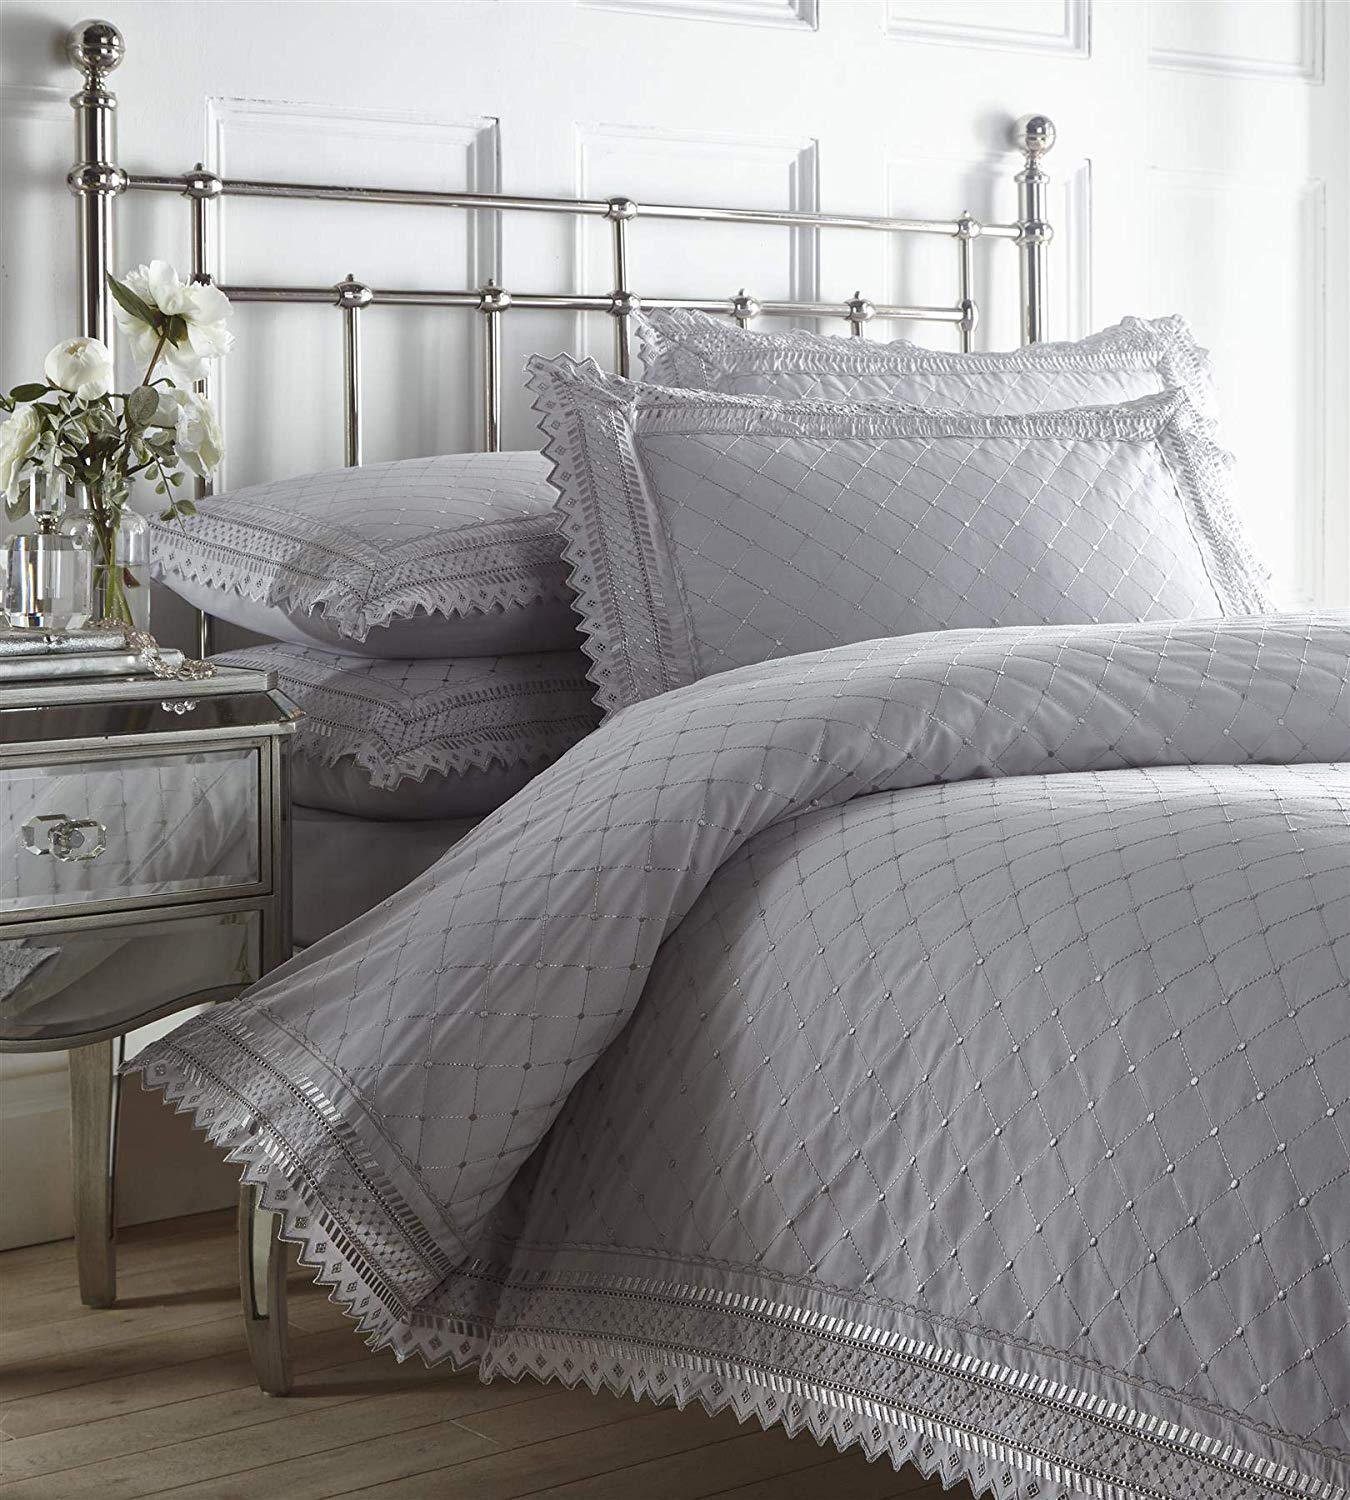 Broiderie Anglaise Grey Duvet Cover Set, Silver Gray Duvet Covers